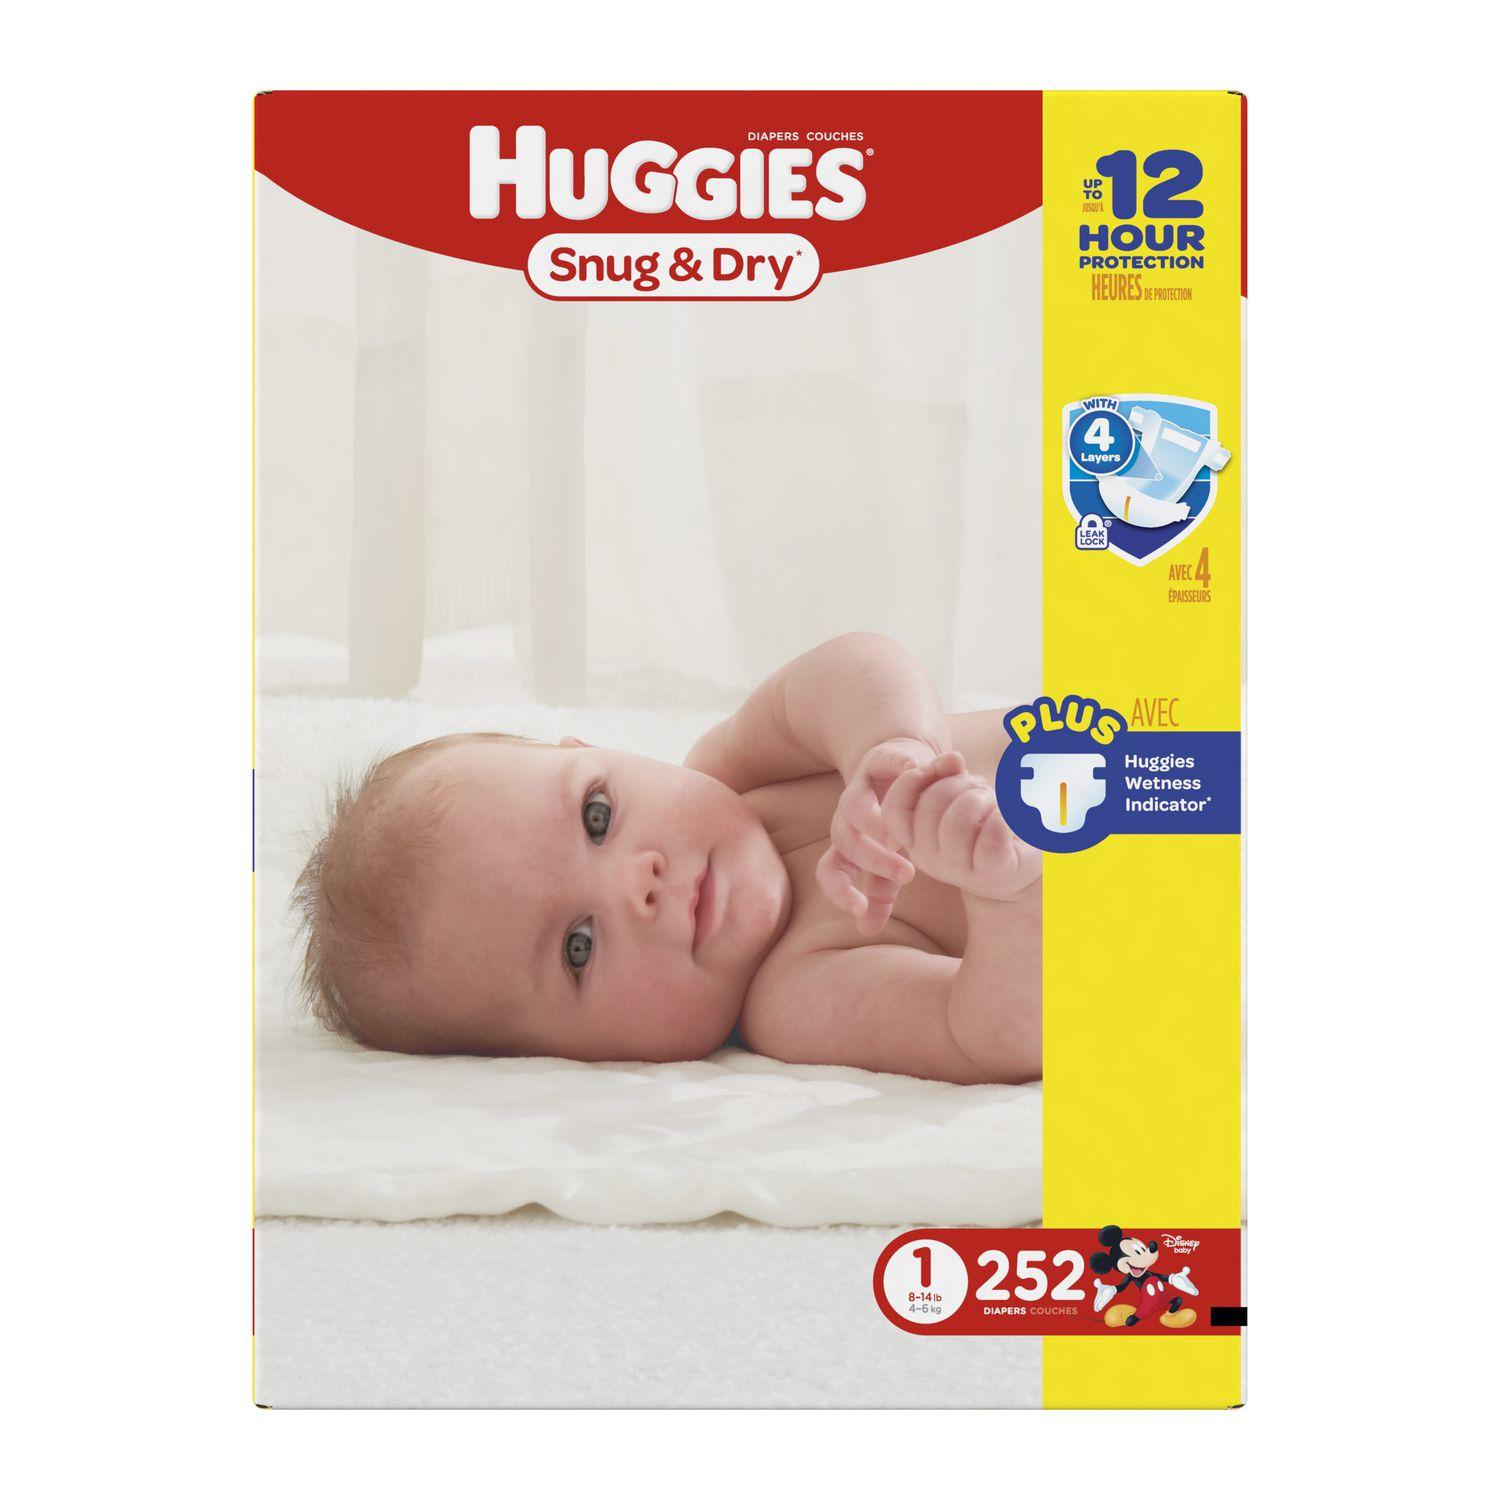 Huggies Snug & Dry Diapers, Size 1, 252 Count